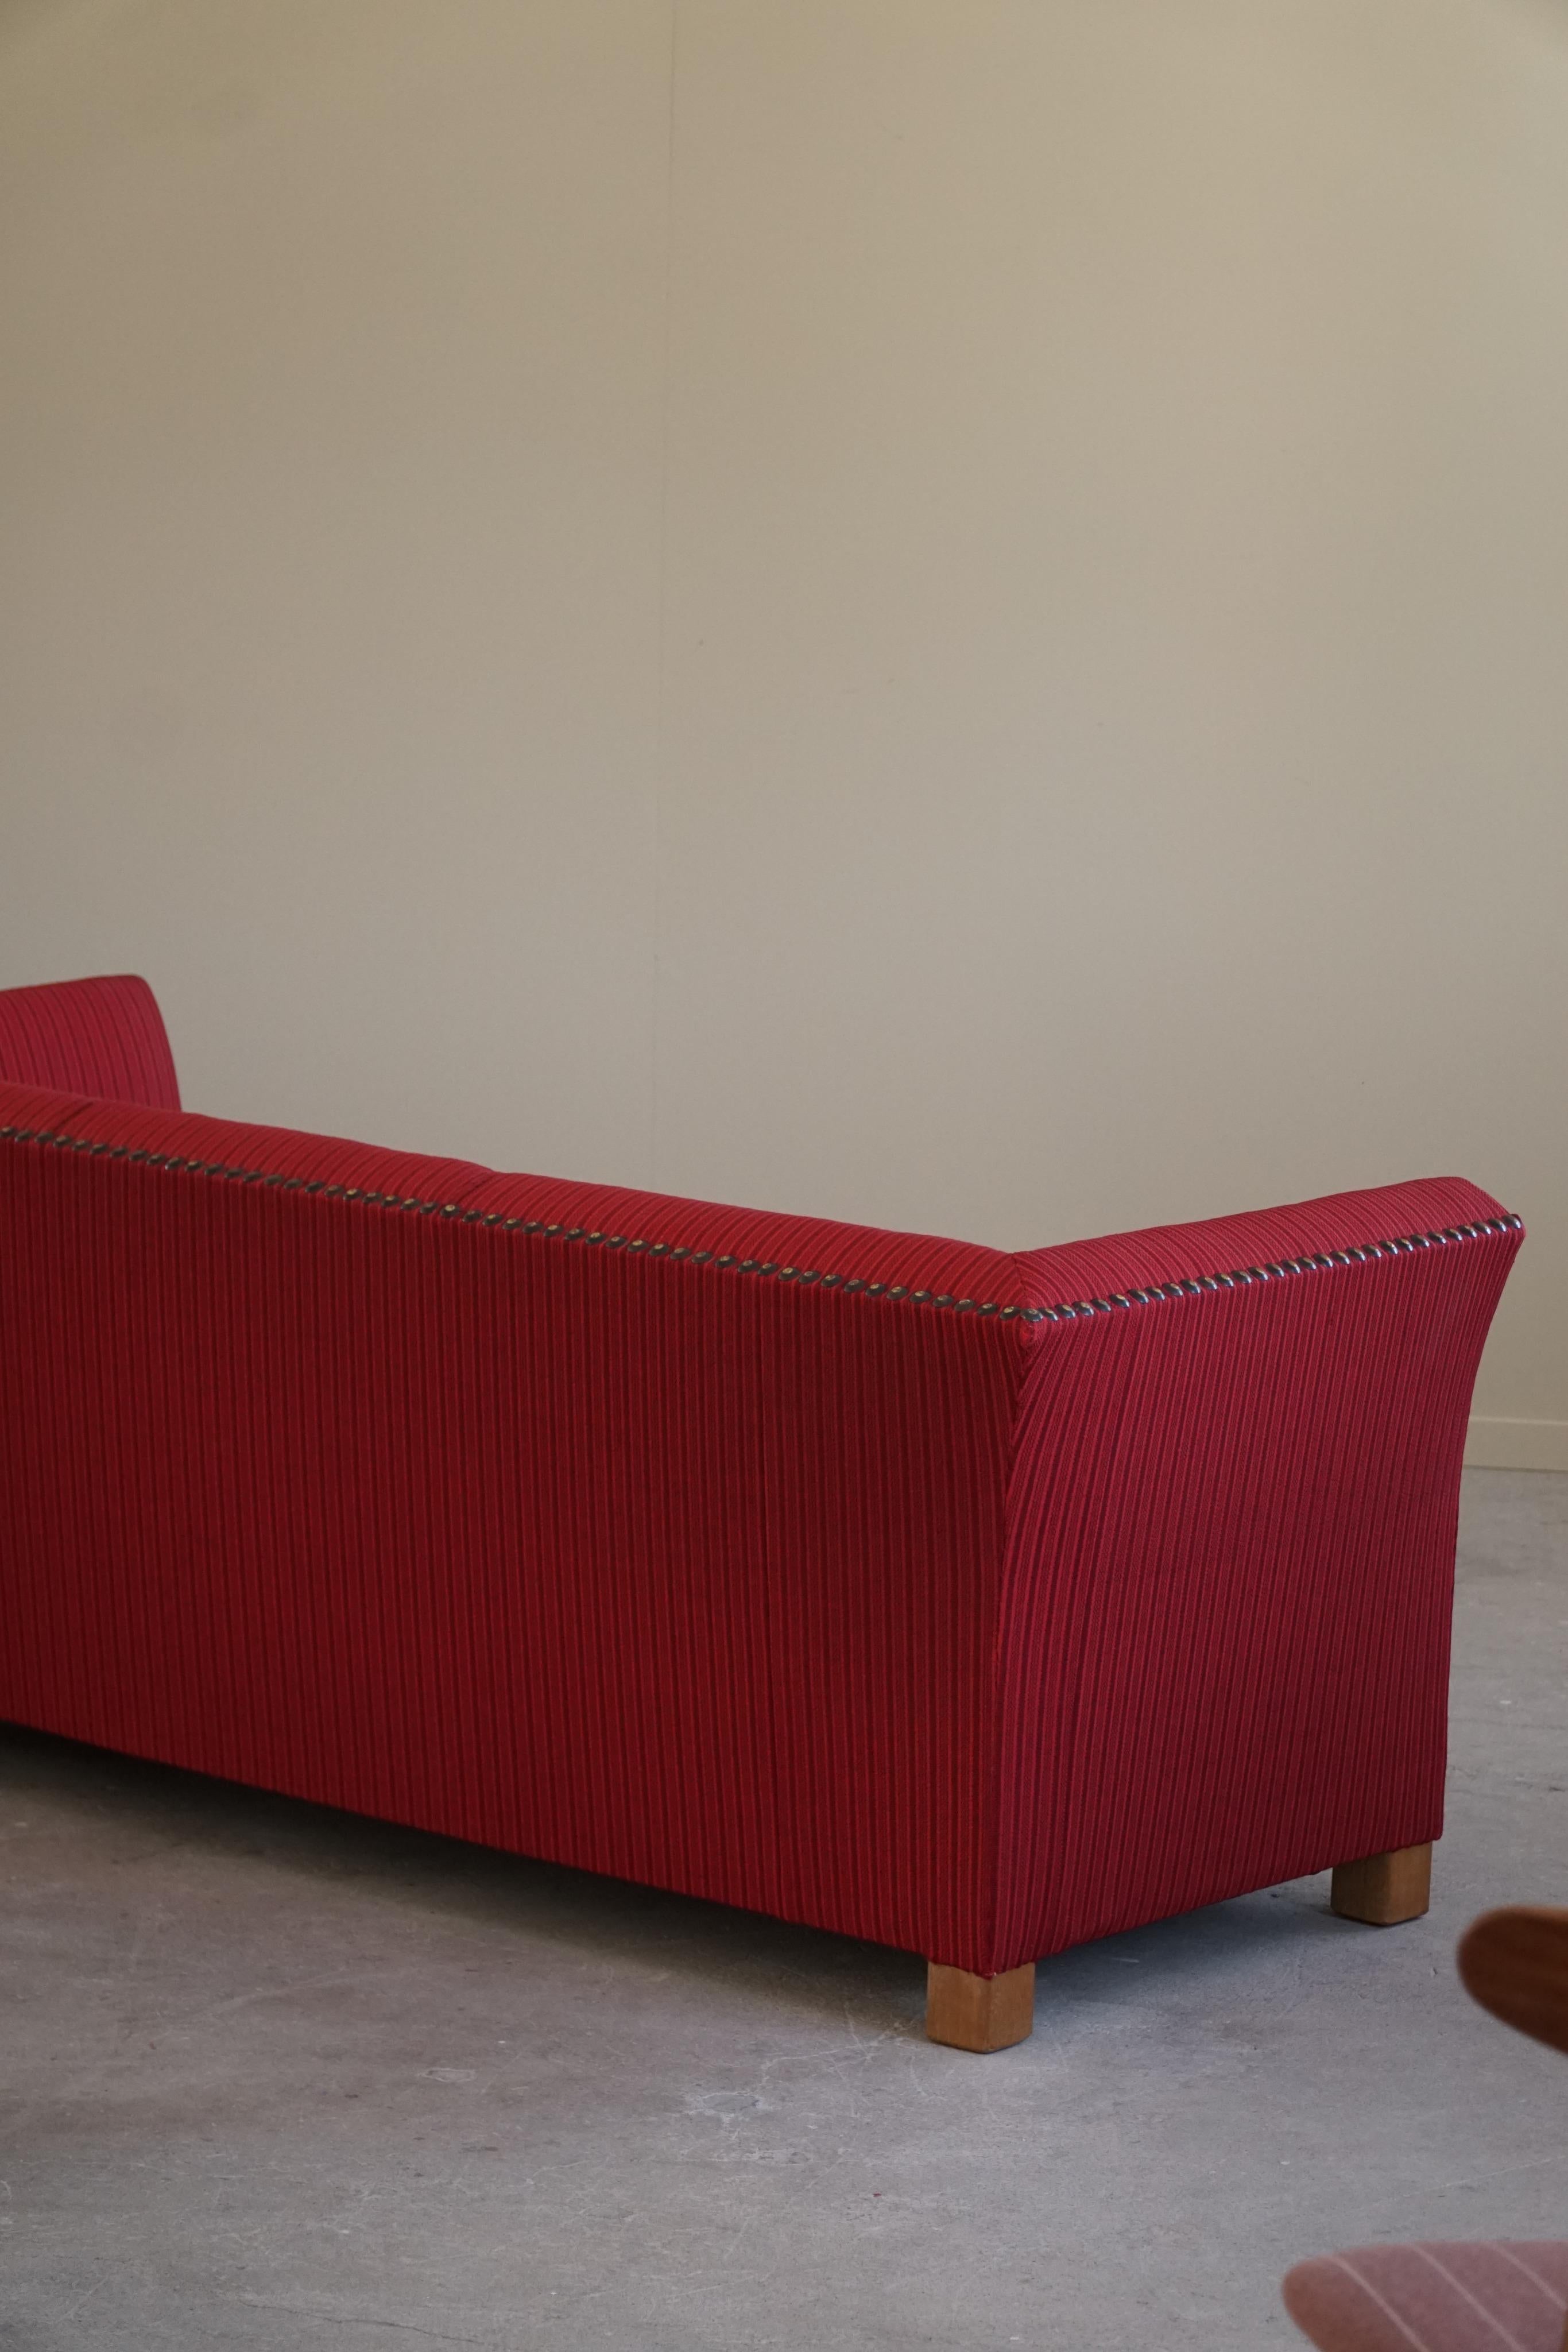 Art Deco 3-Seater Sofa By A Danish Cabinetmaker, Flemming Lassen Style, 1940s For Sale 11